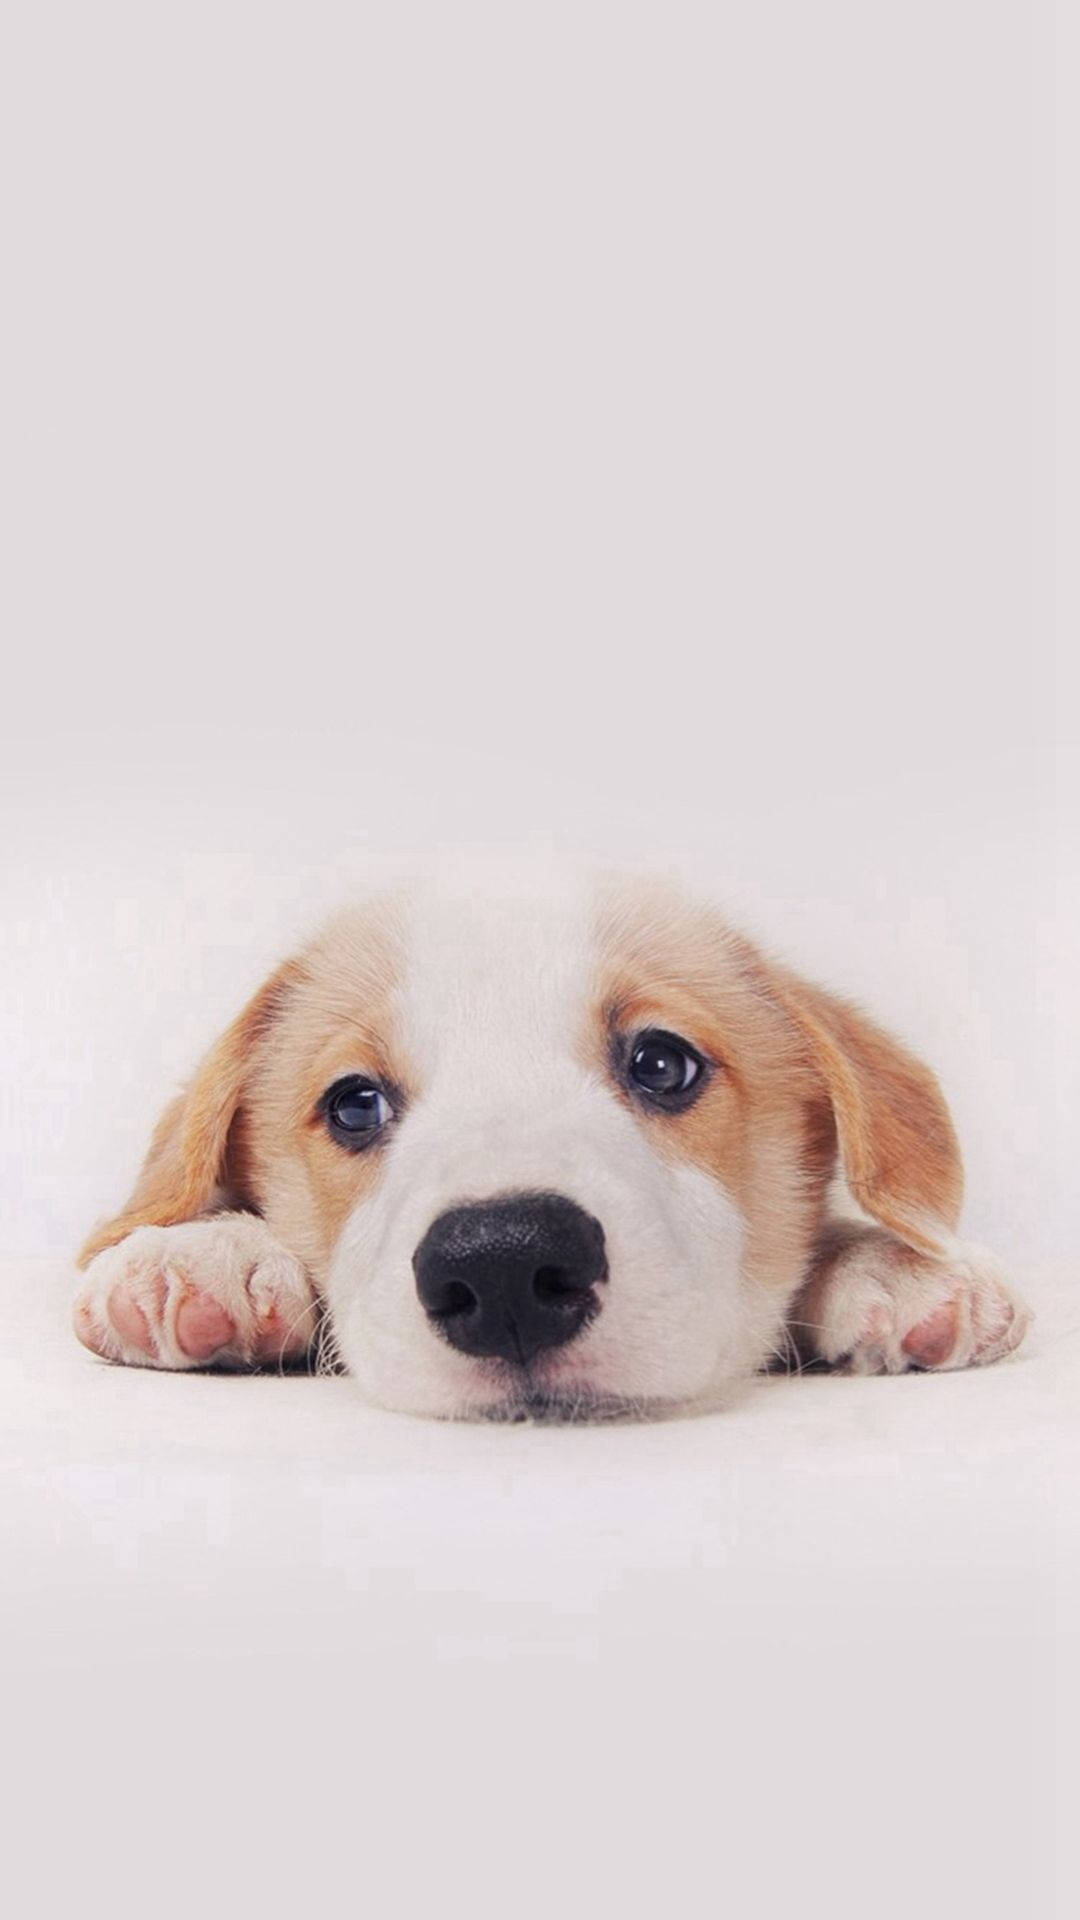 Simple Puppy Dog In White Wallpaper